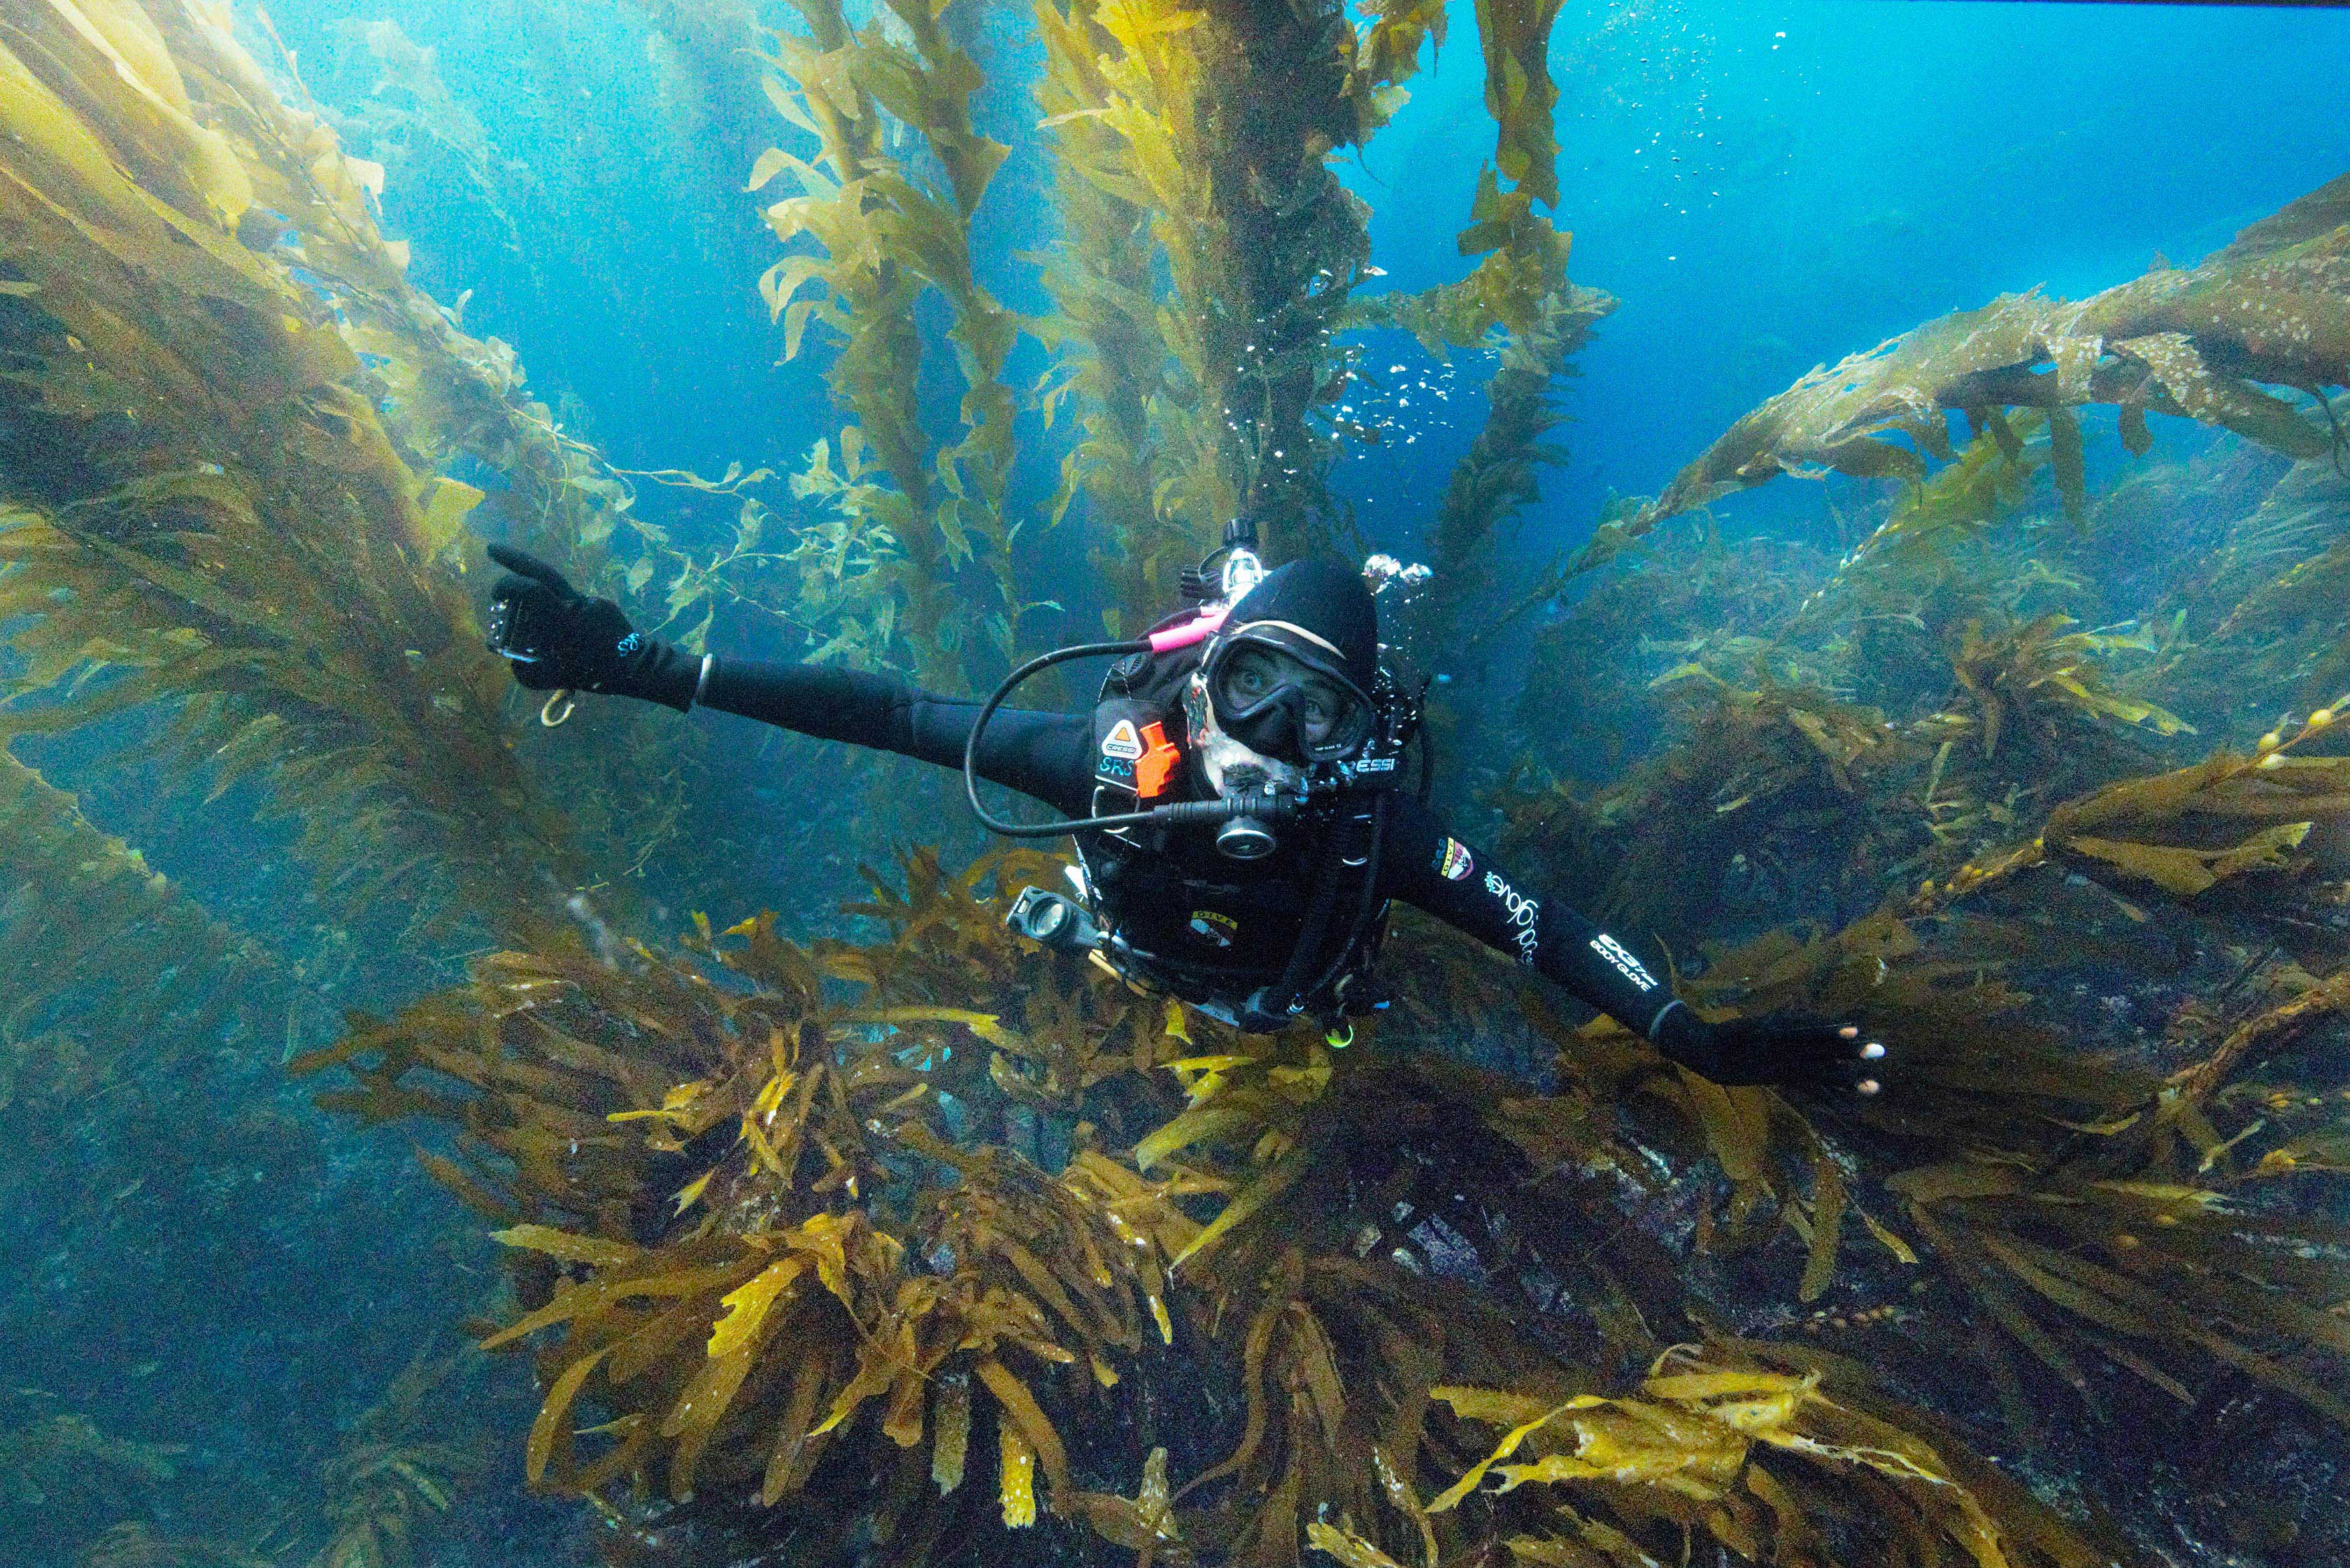 Top view of diver swimming up in kelp forest